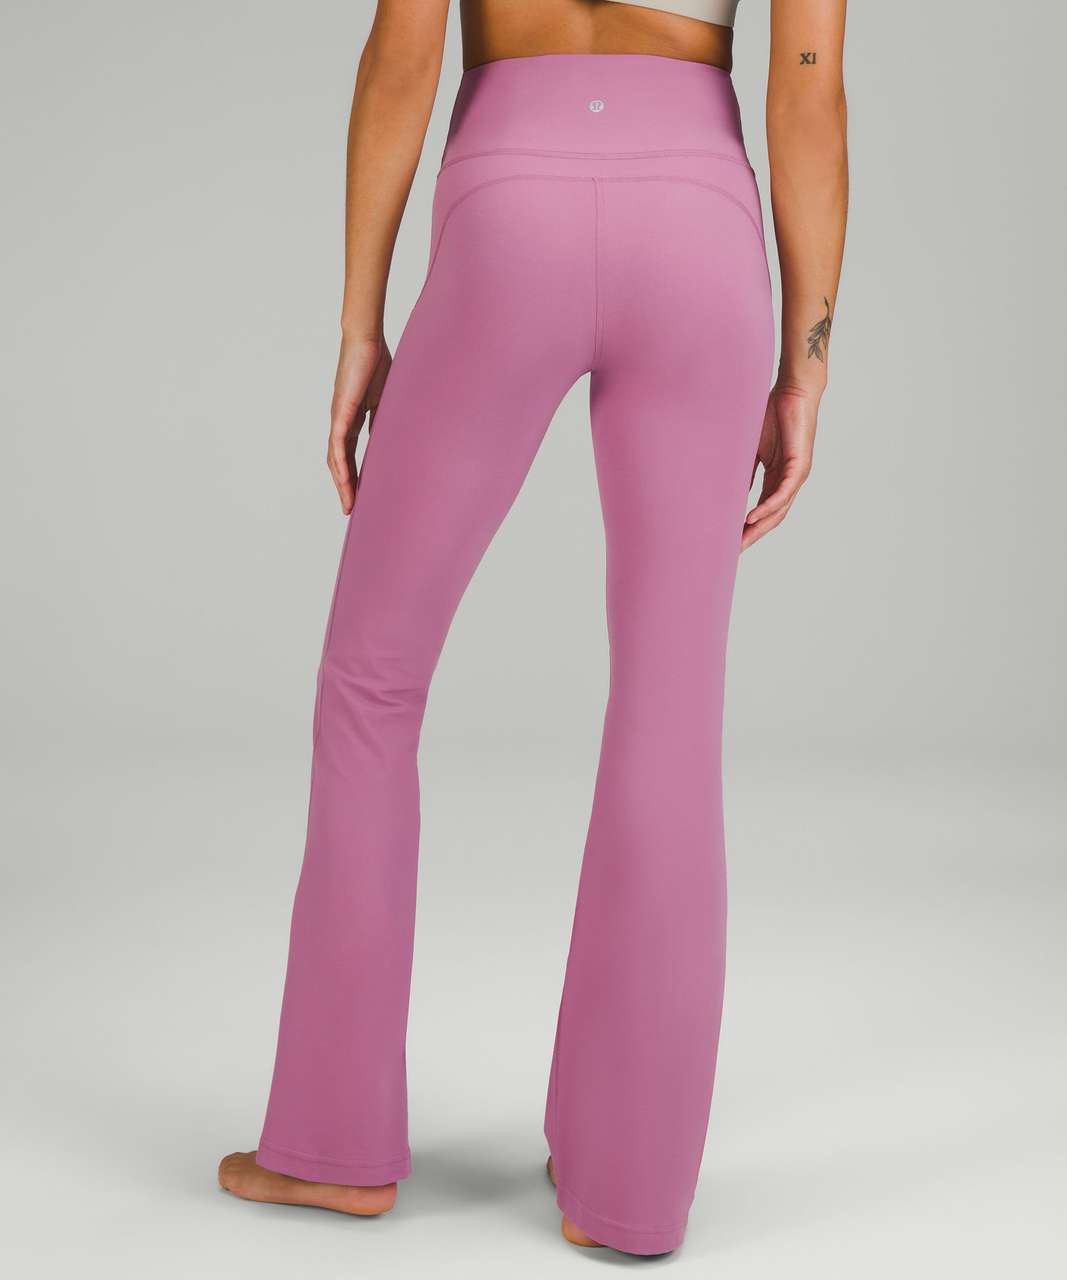 High Waist Flared Pink Yoga Pants Flare For Women Slim Fit Bell